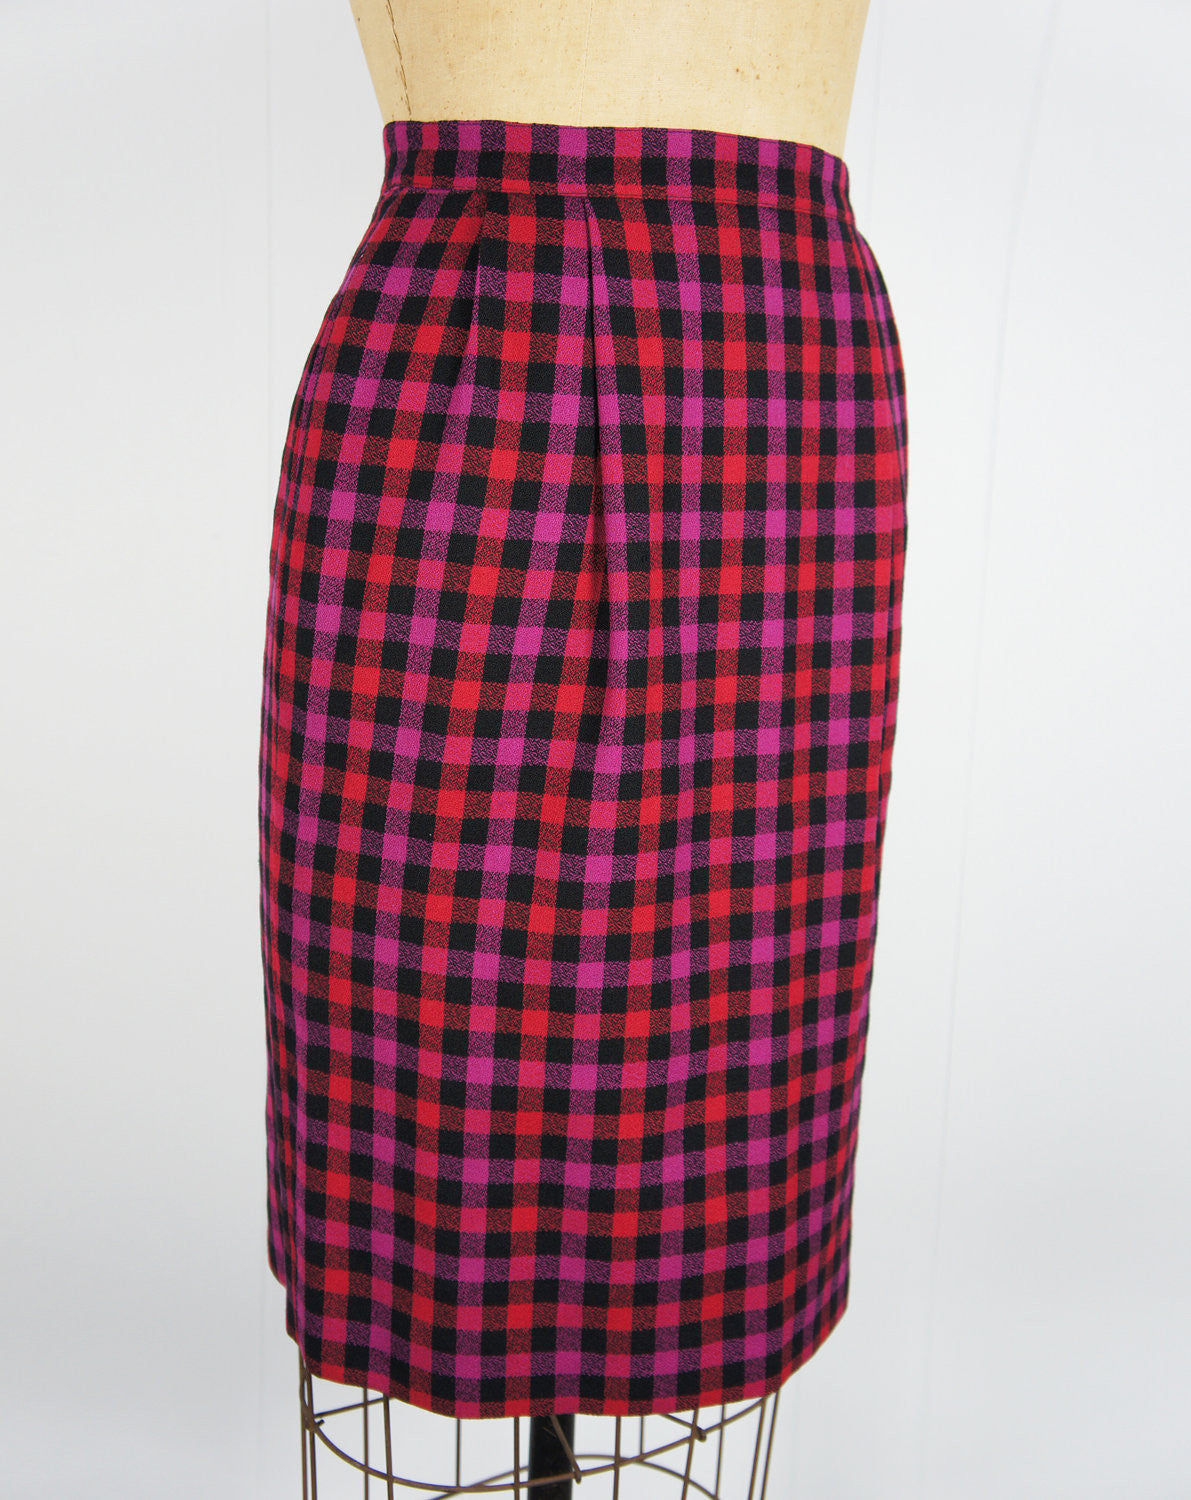 1980's Pink, Purple & Black Checkered Wool Pencil Skirt - Size S